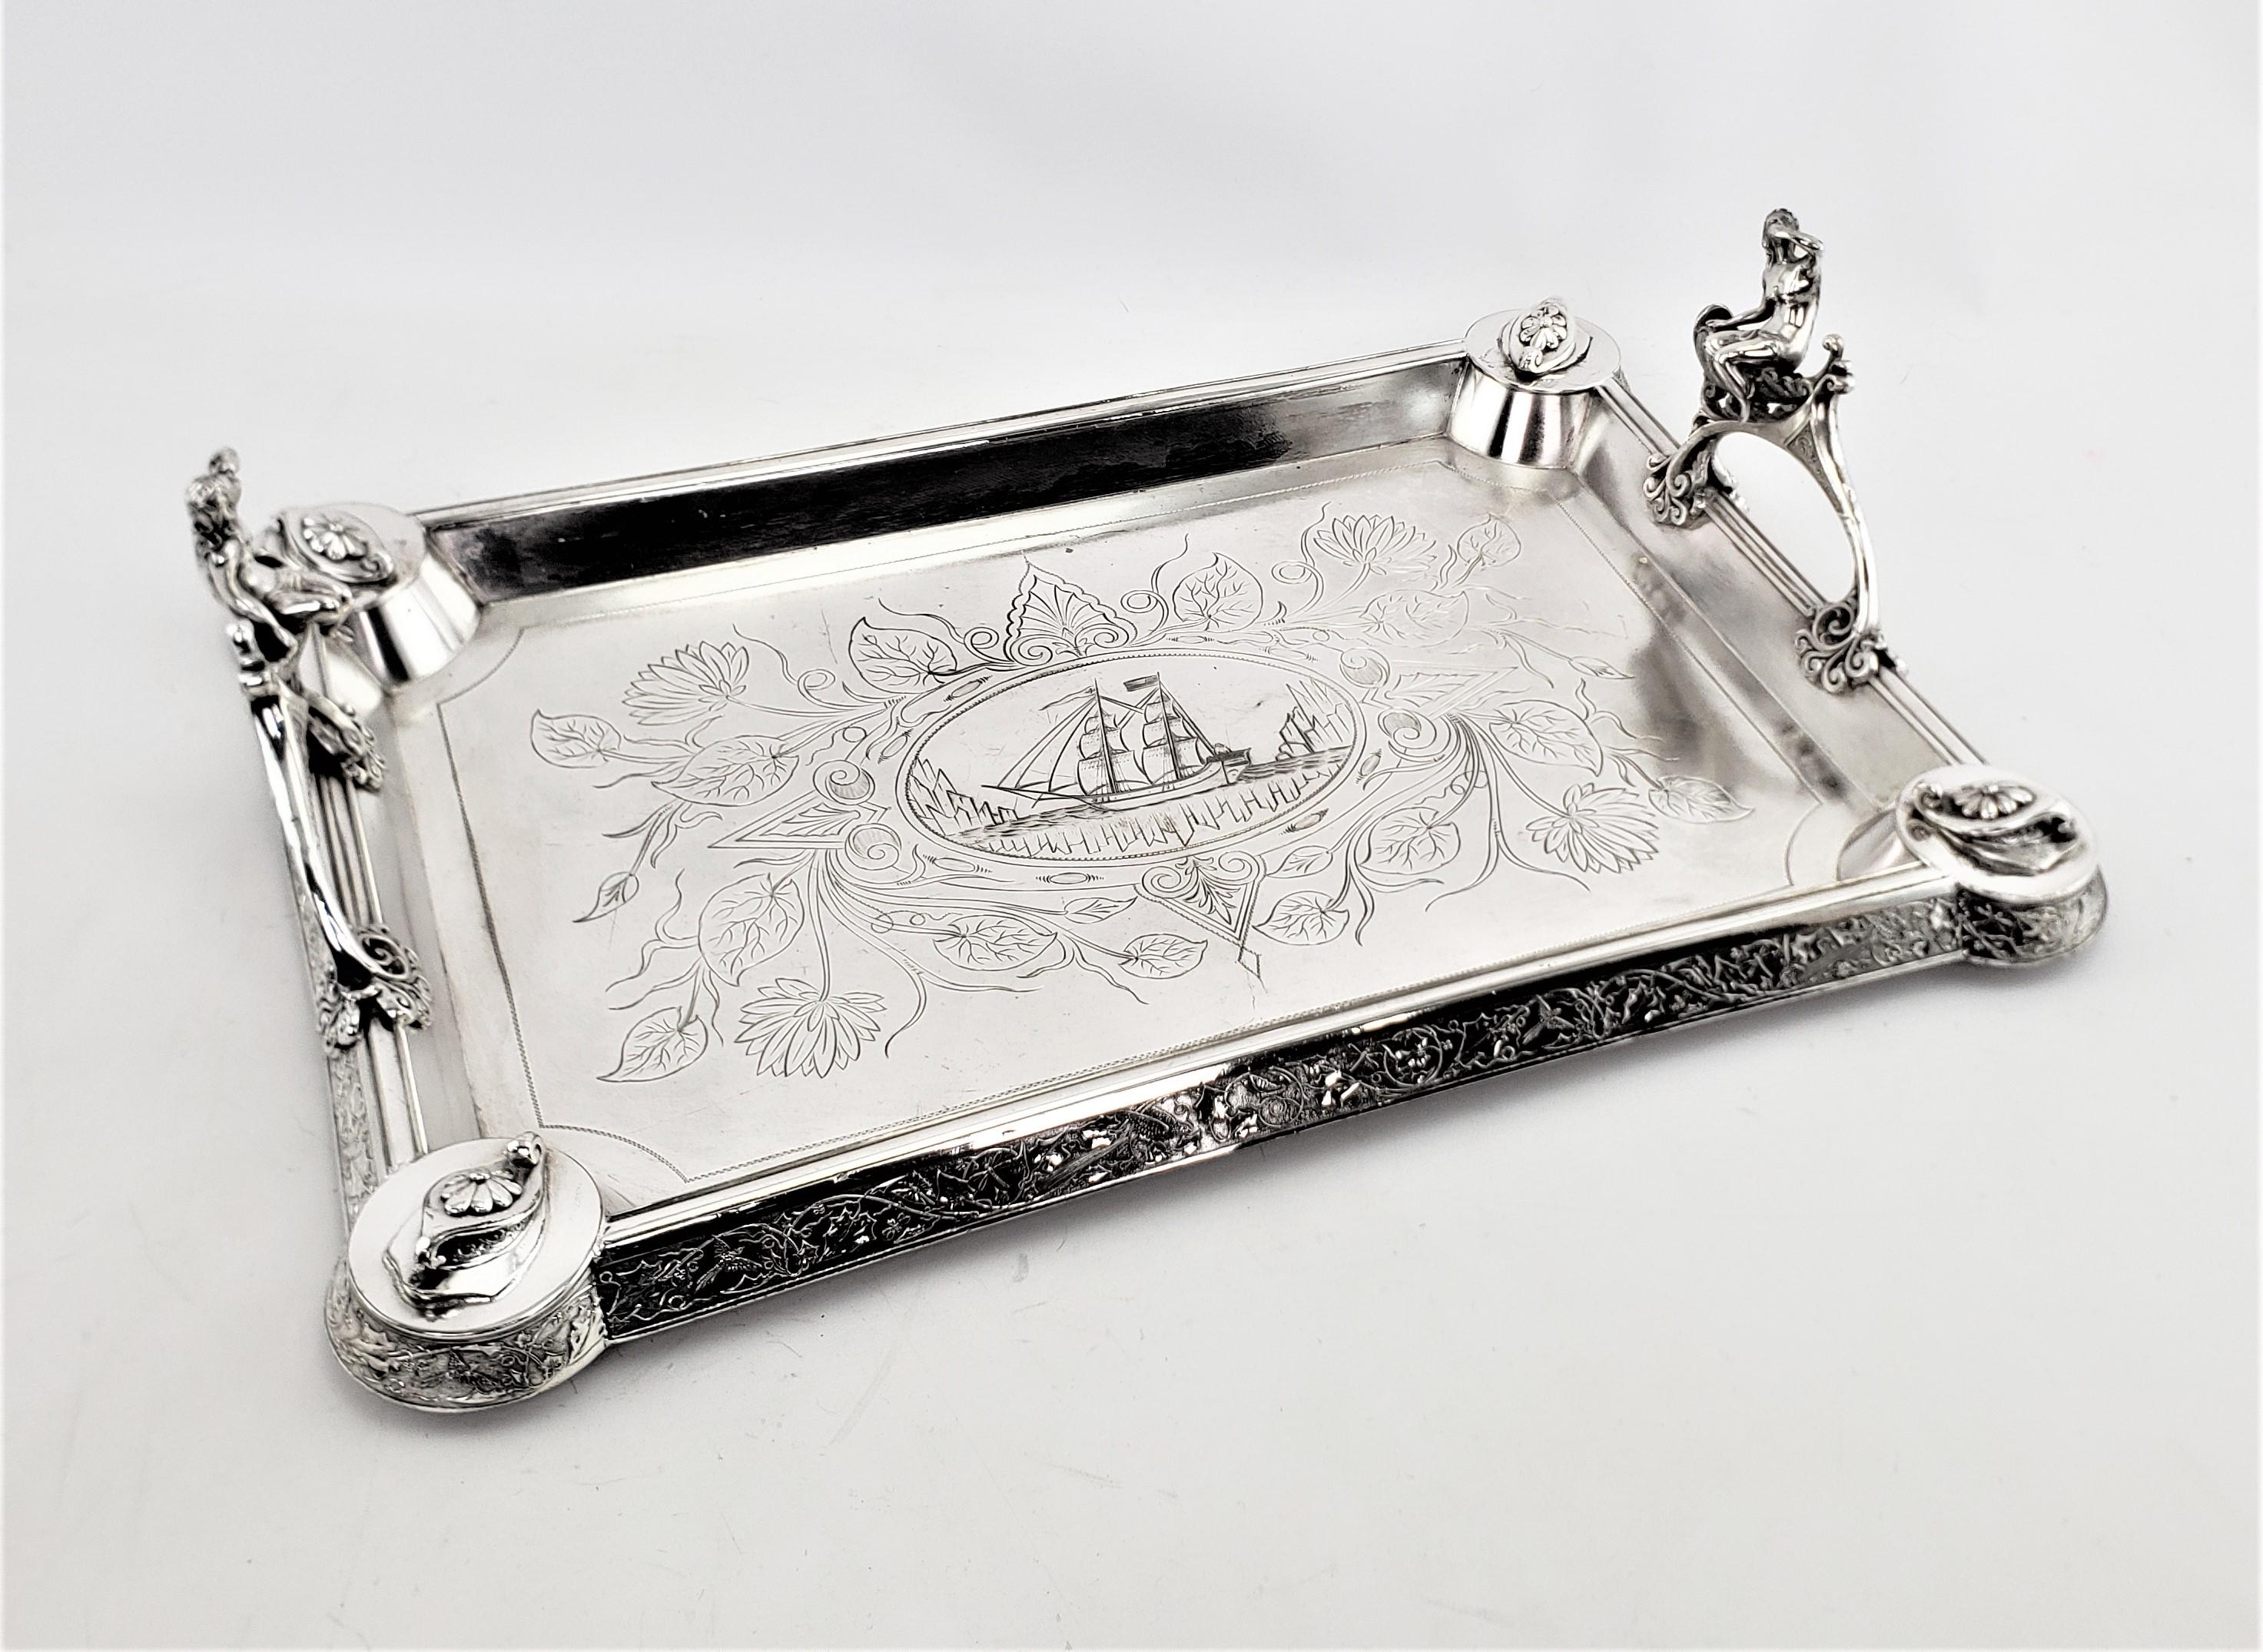 This very elaborate and well executed silver plated serving tray is unsigned, but presumed to have originated from the United States, possibly by Meridian, and dating to approximately 1890 and done in the period Aesthetic Movement style. The tray is